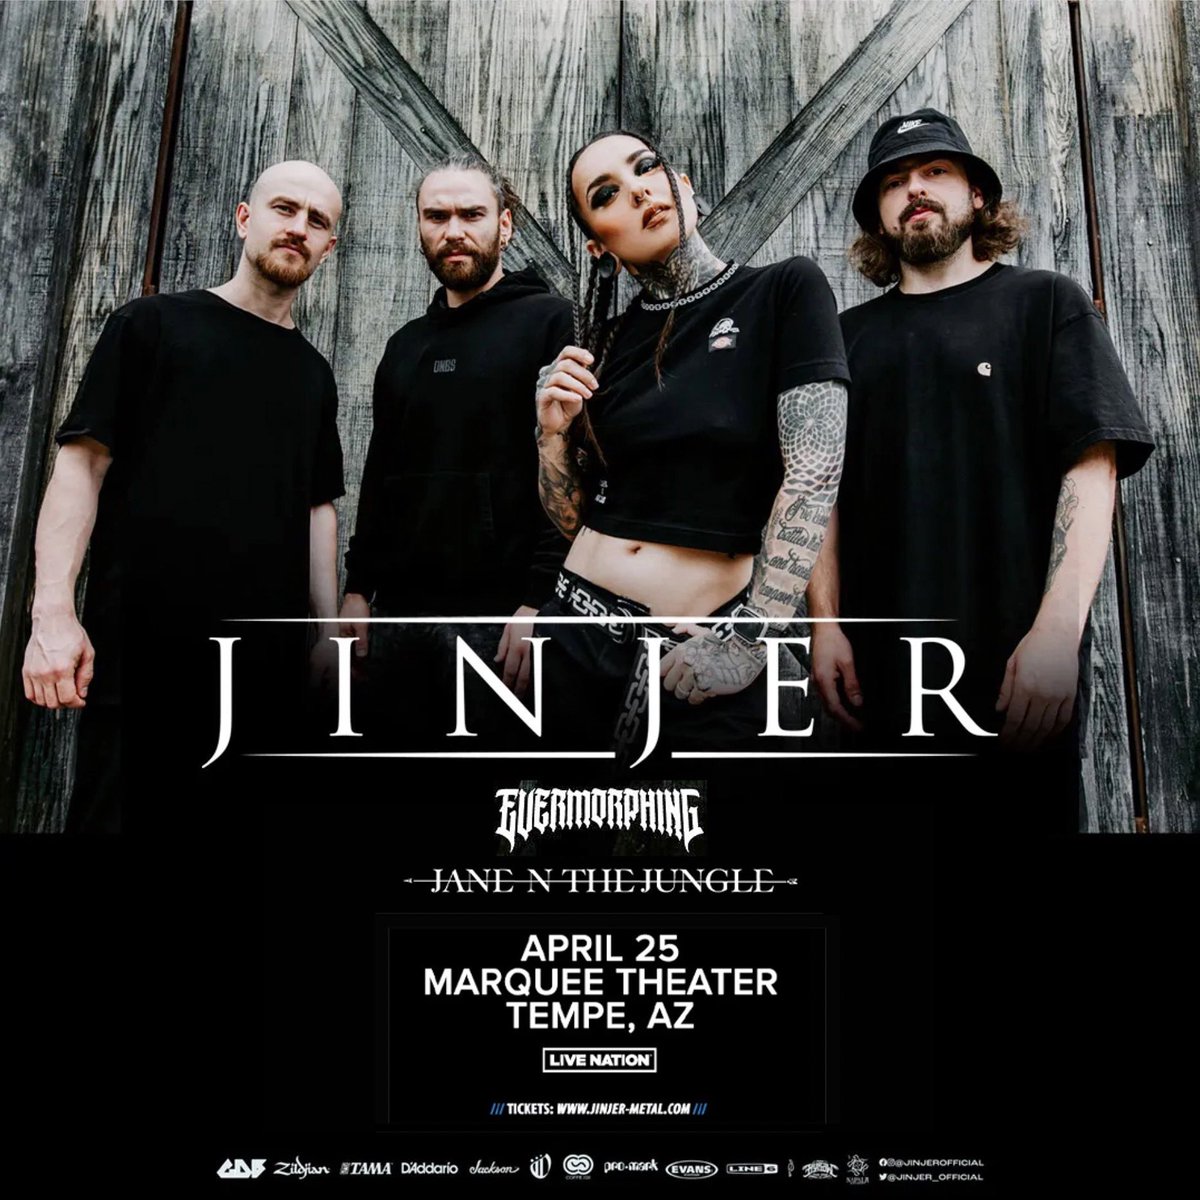 This Thursday, 4/25 WE ROCK Marquee Theater with @jinjerofficial and Evermorphing in Tempe, AZ! Tickets = seetickets.us/event/jinjer/5…